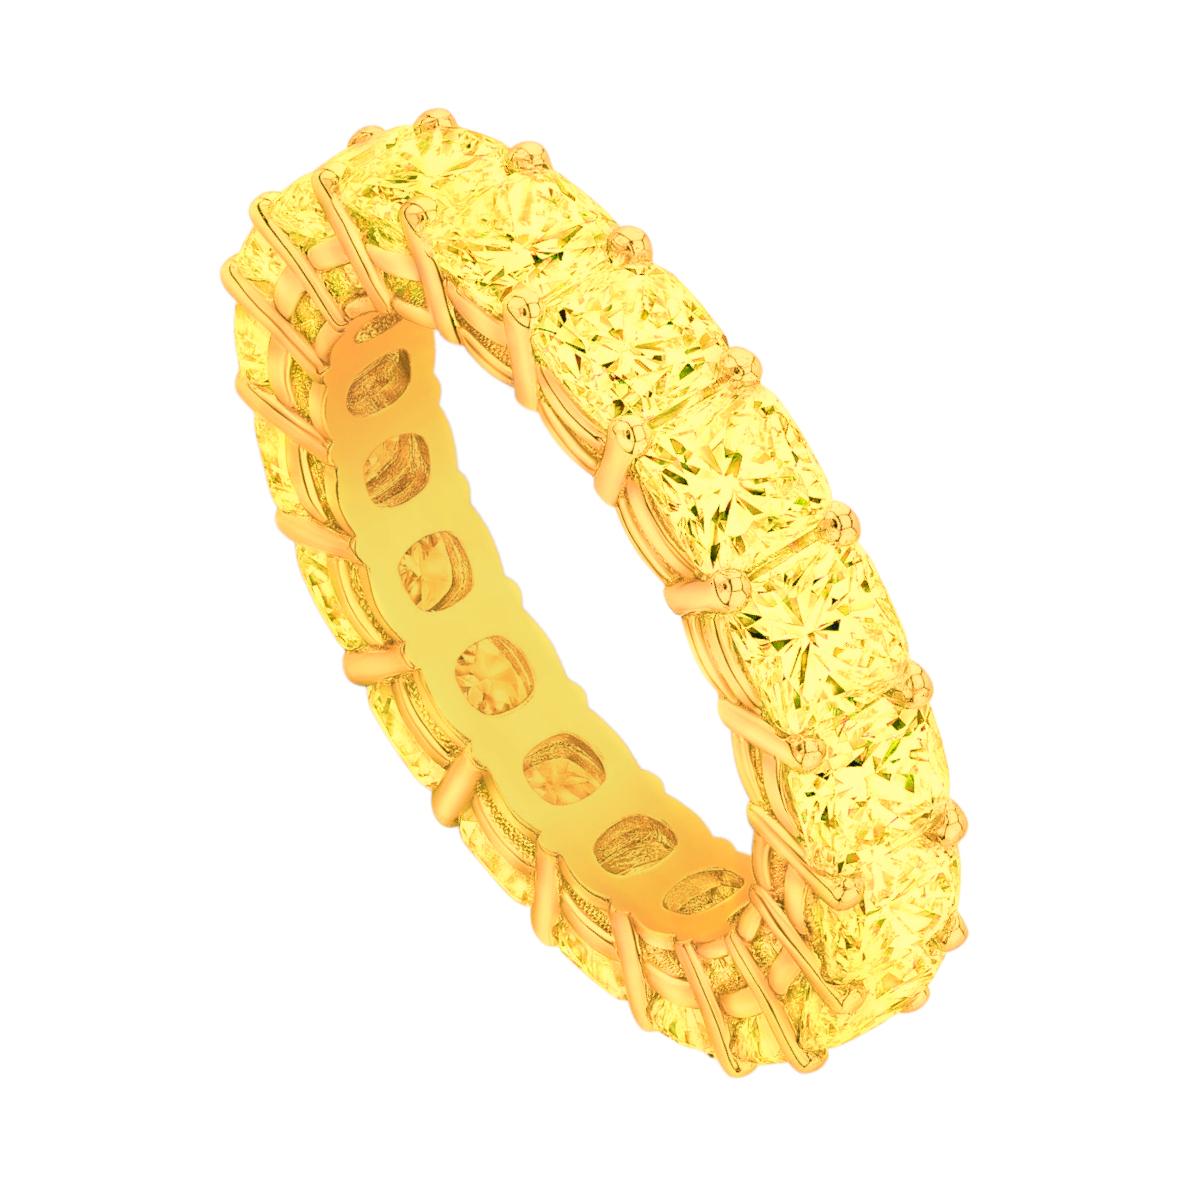 Cushion Cut 6 Carat Fancy Yellow Eternity Band Ring Set in 18 Carat Yellow Gold For Sale